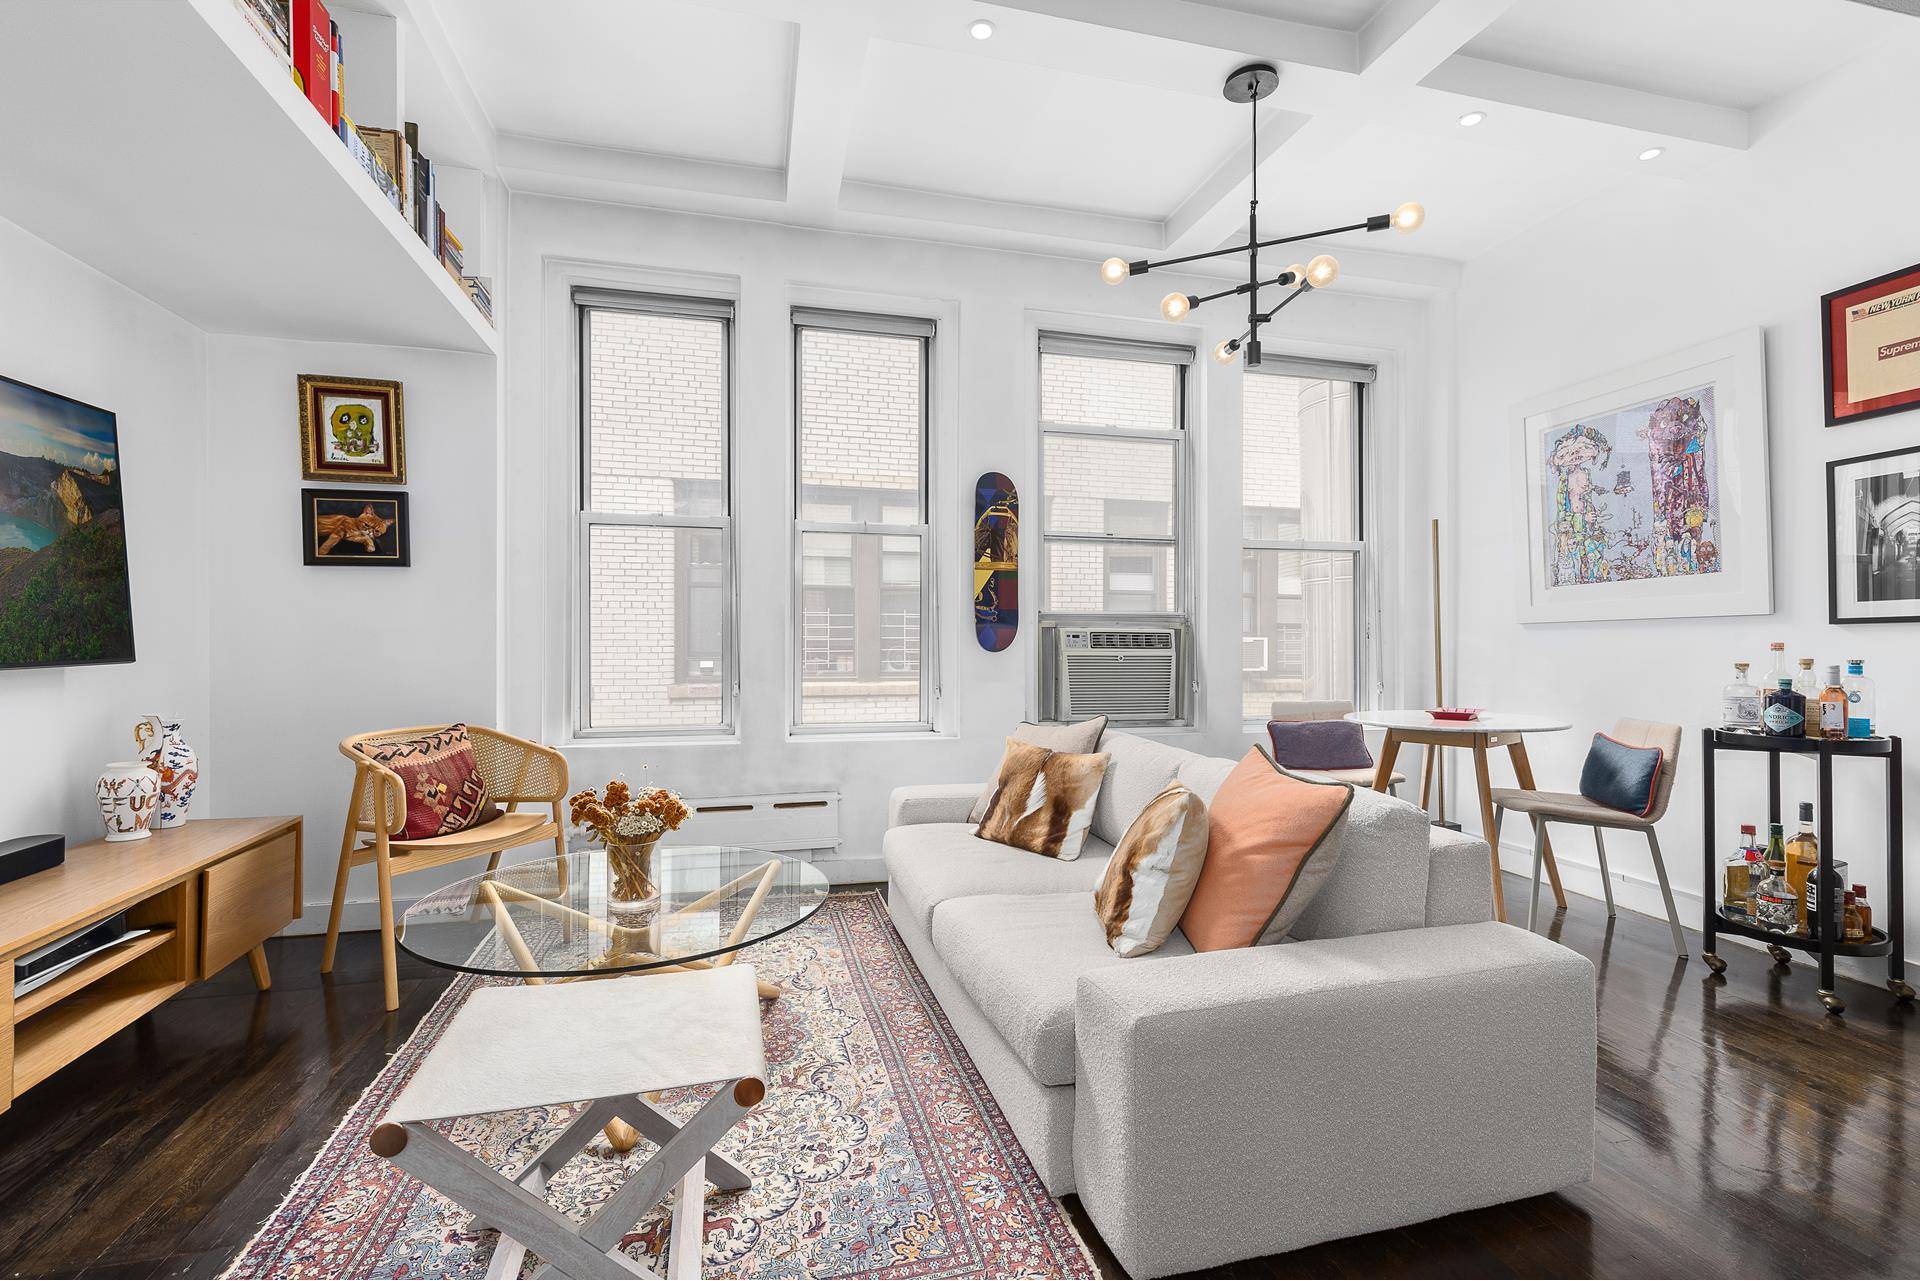 Located in the heart of NoMad adjacent to world famous Madison Square Park, Residence 12D is a recently renovated, one bedroom, one and a half bathroom home in one of ...